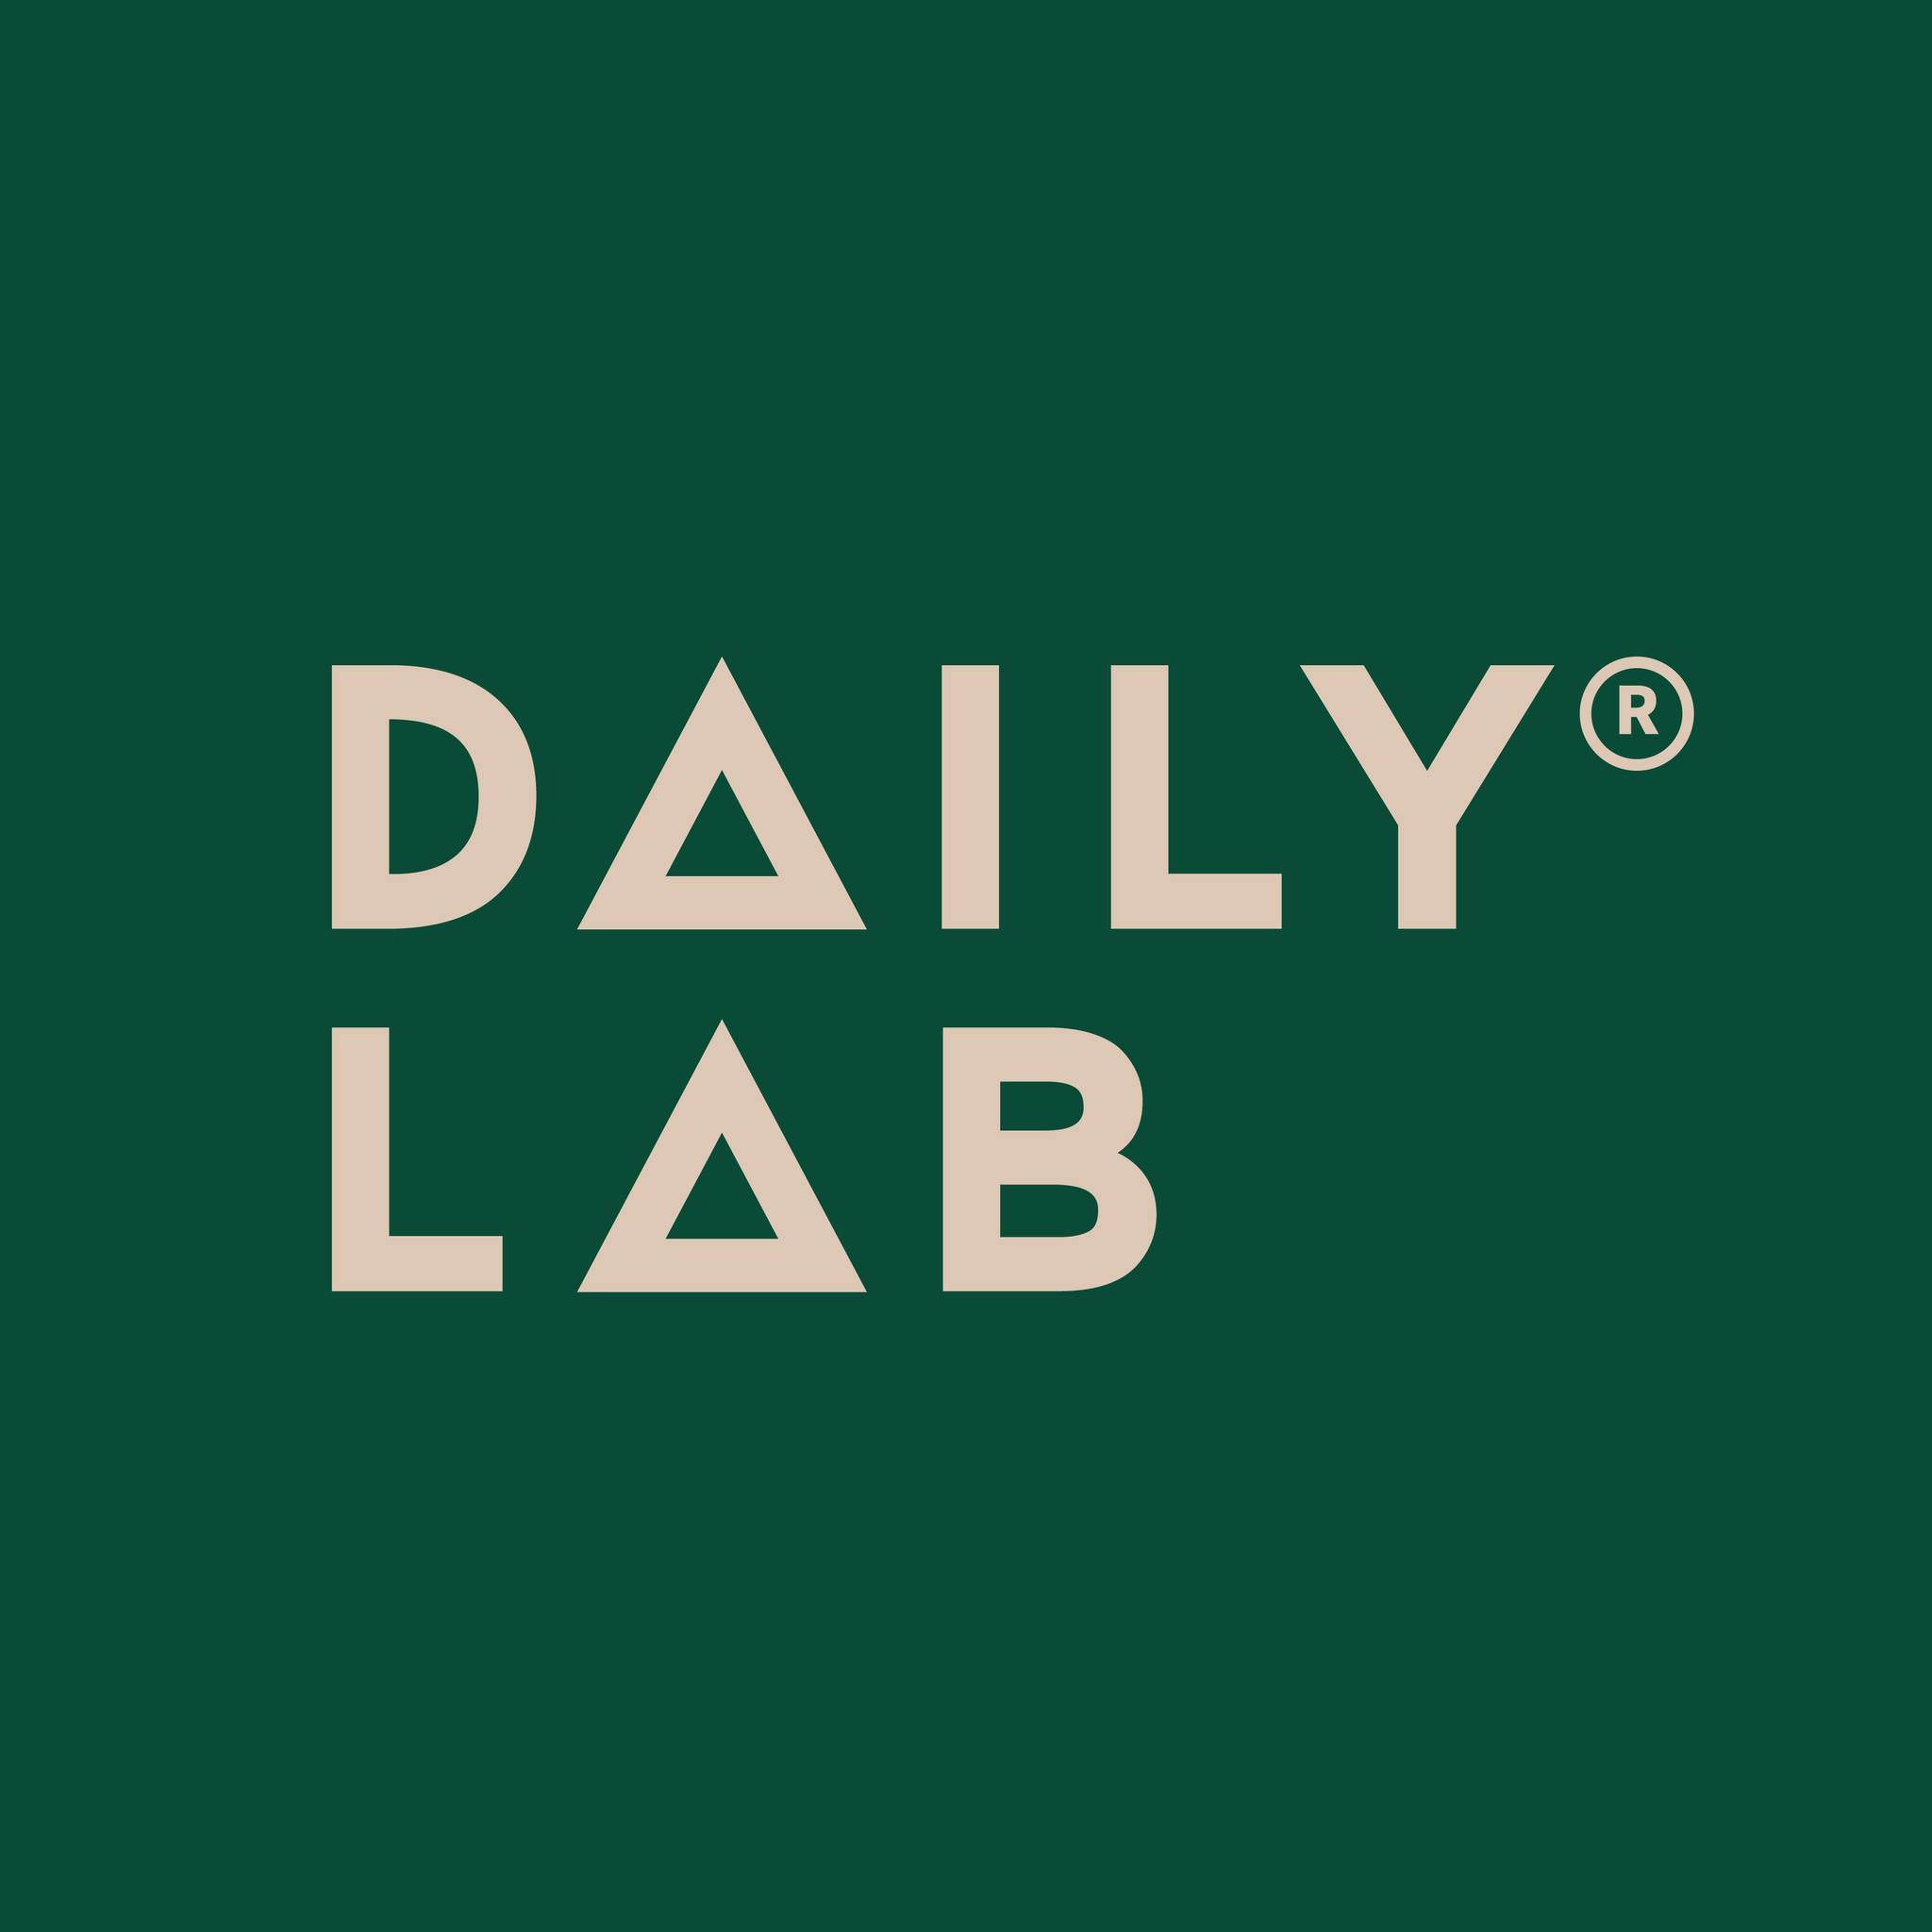 Daily Lab